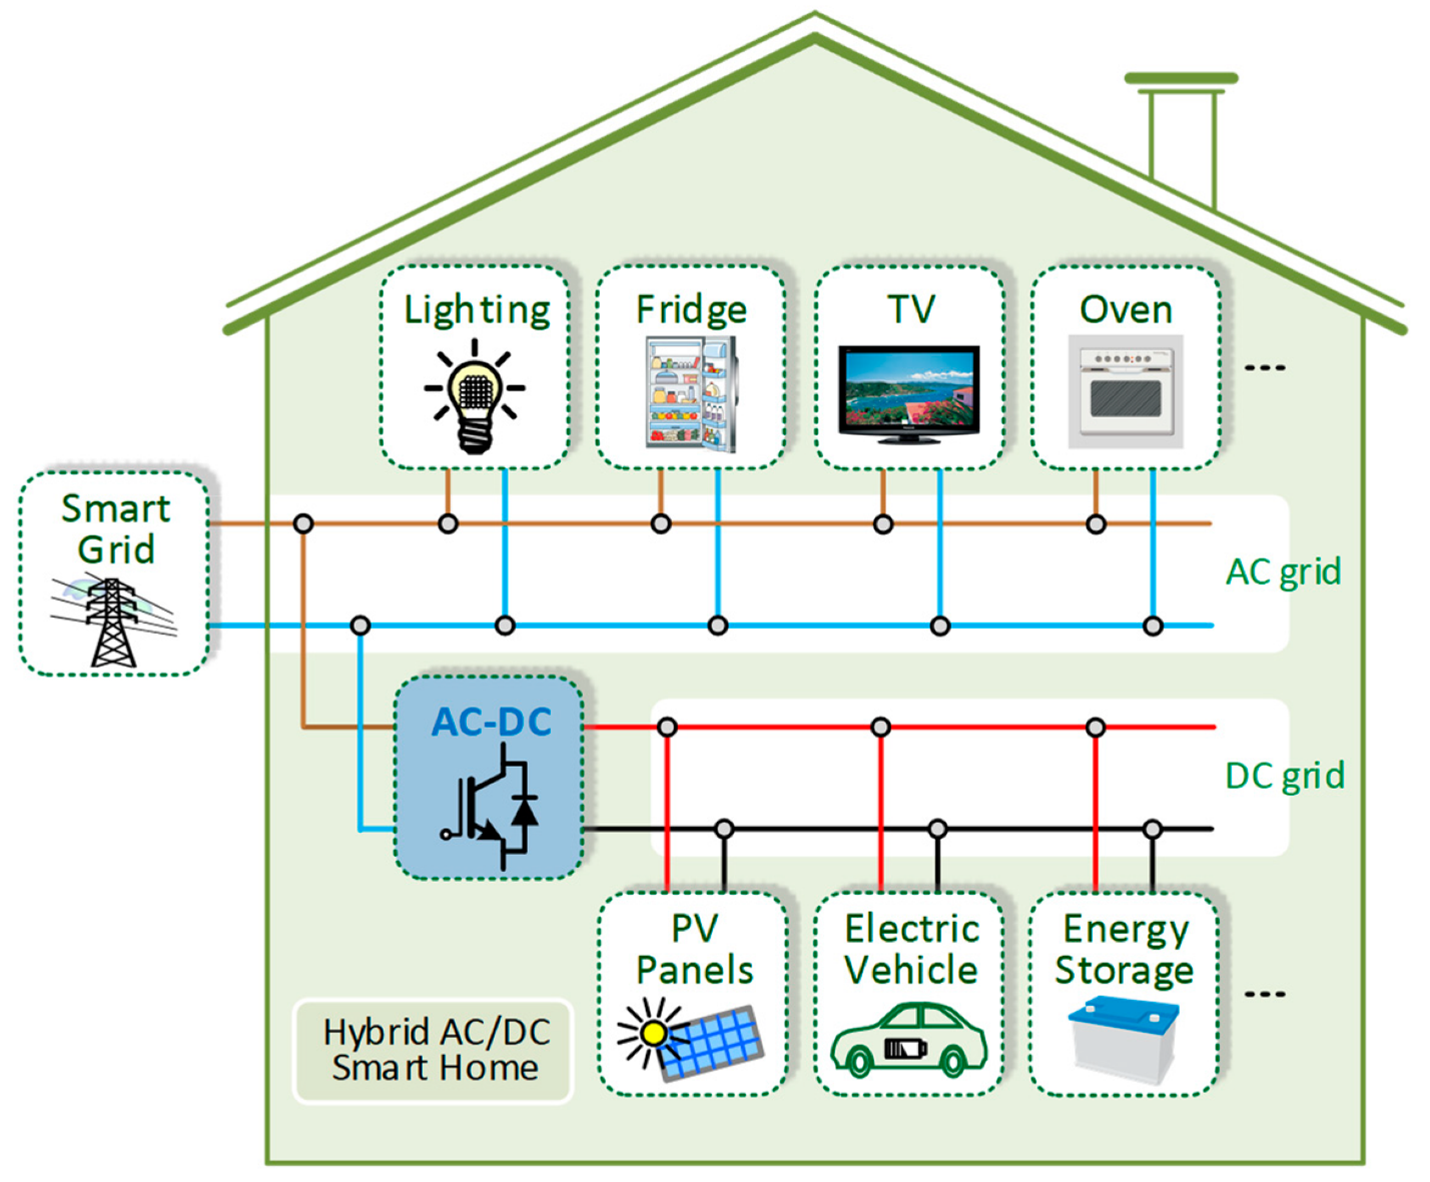 The Role of Front-End AC/DC Converters in Hybrid AC/DC Smart Homes